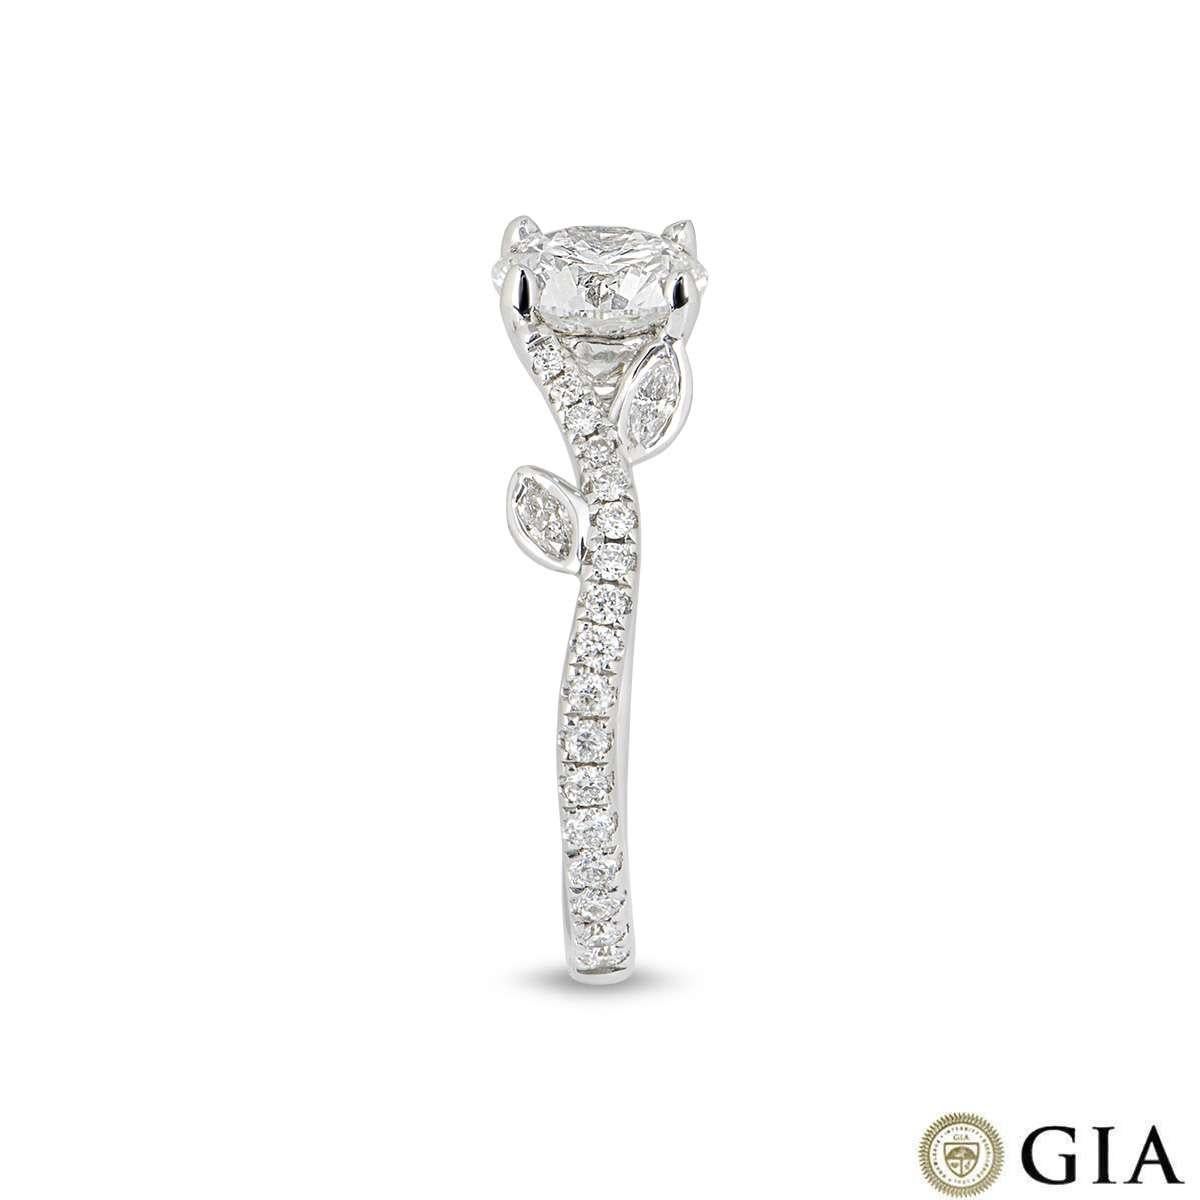 A gorgeous 18k white gold diamond engagement ring. The ring features an intricate floral design set to the centre with a round brilliant cut diamond weighing 1.01ct, E colour and VVS1 clarity. The centre stone is enhanced by the graceful pave